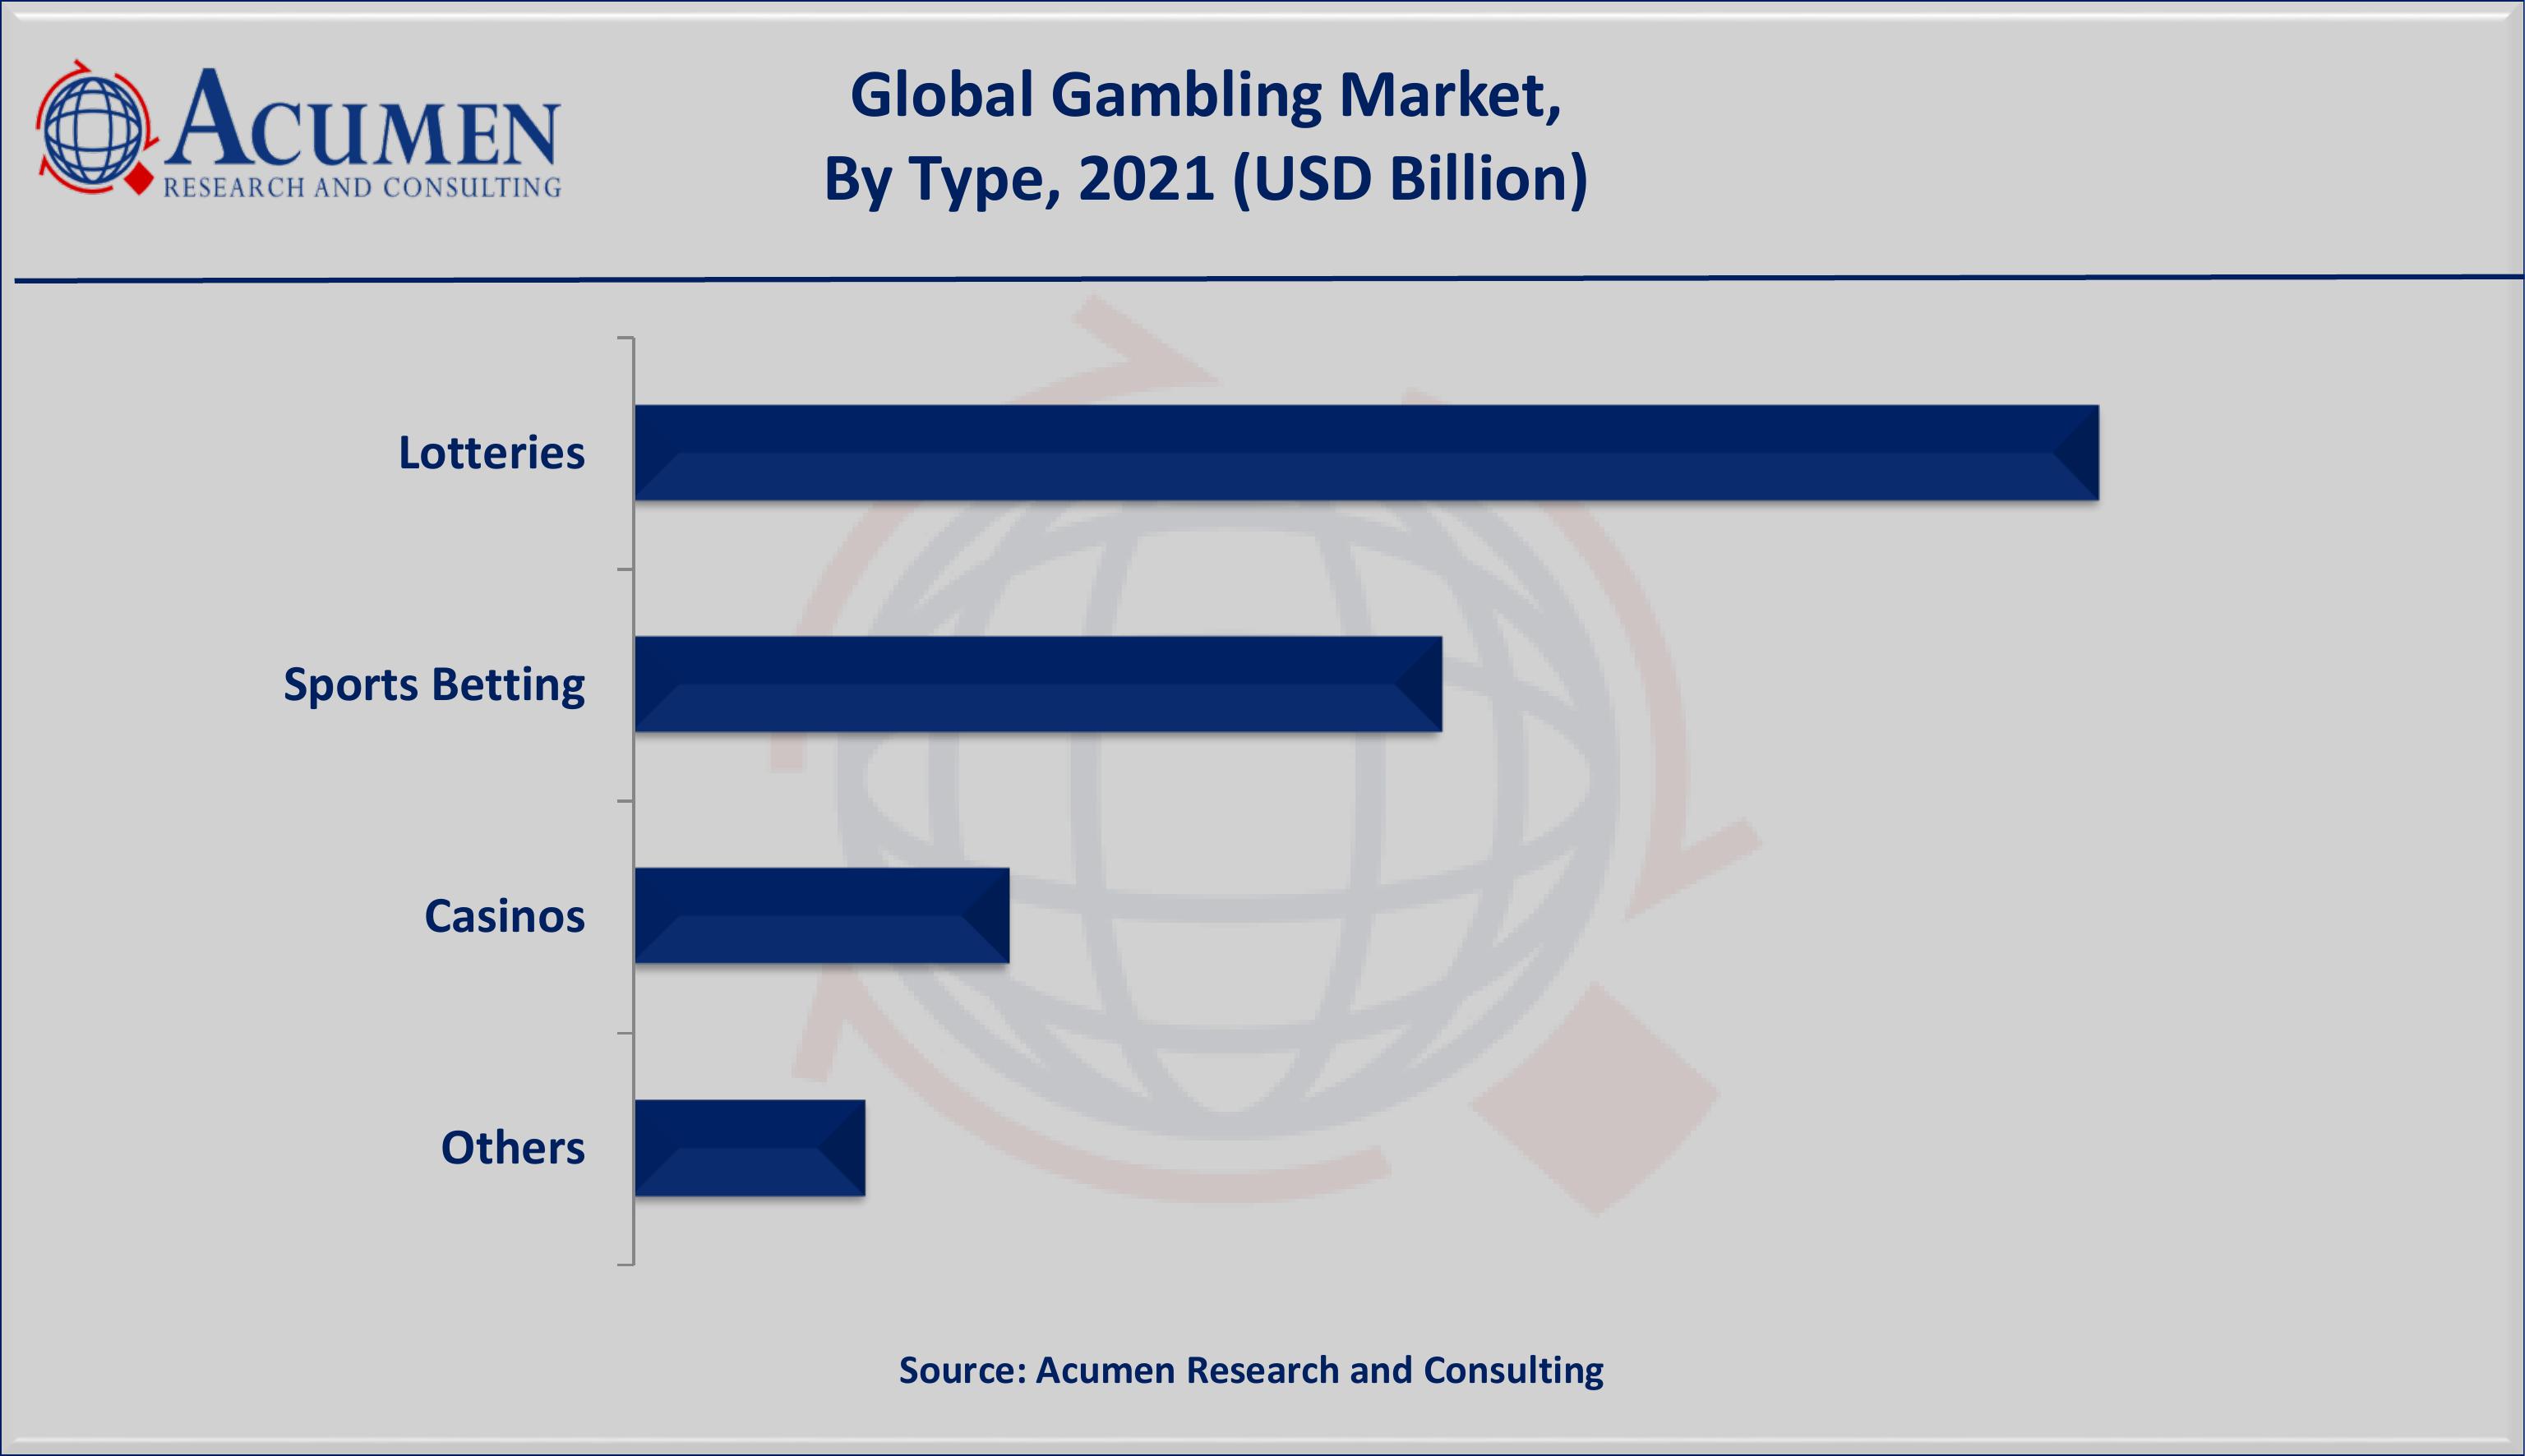 Gambling Market Share accounted for USD 492 billion in 2021 and is projected to reach a market size of USD 804 billion by 2030; growing at a CAGR of 5.7%.